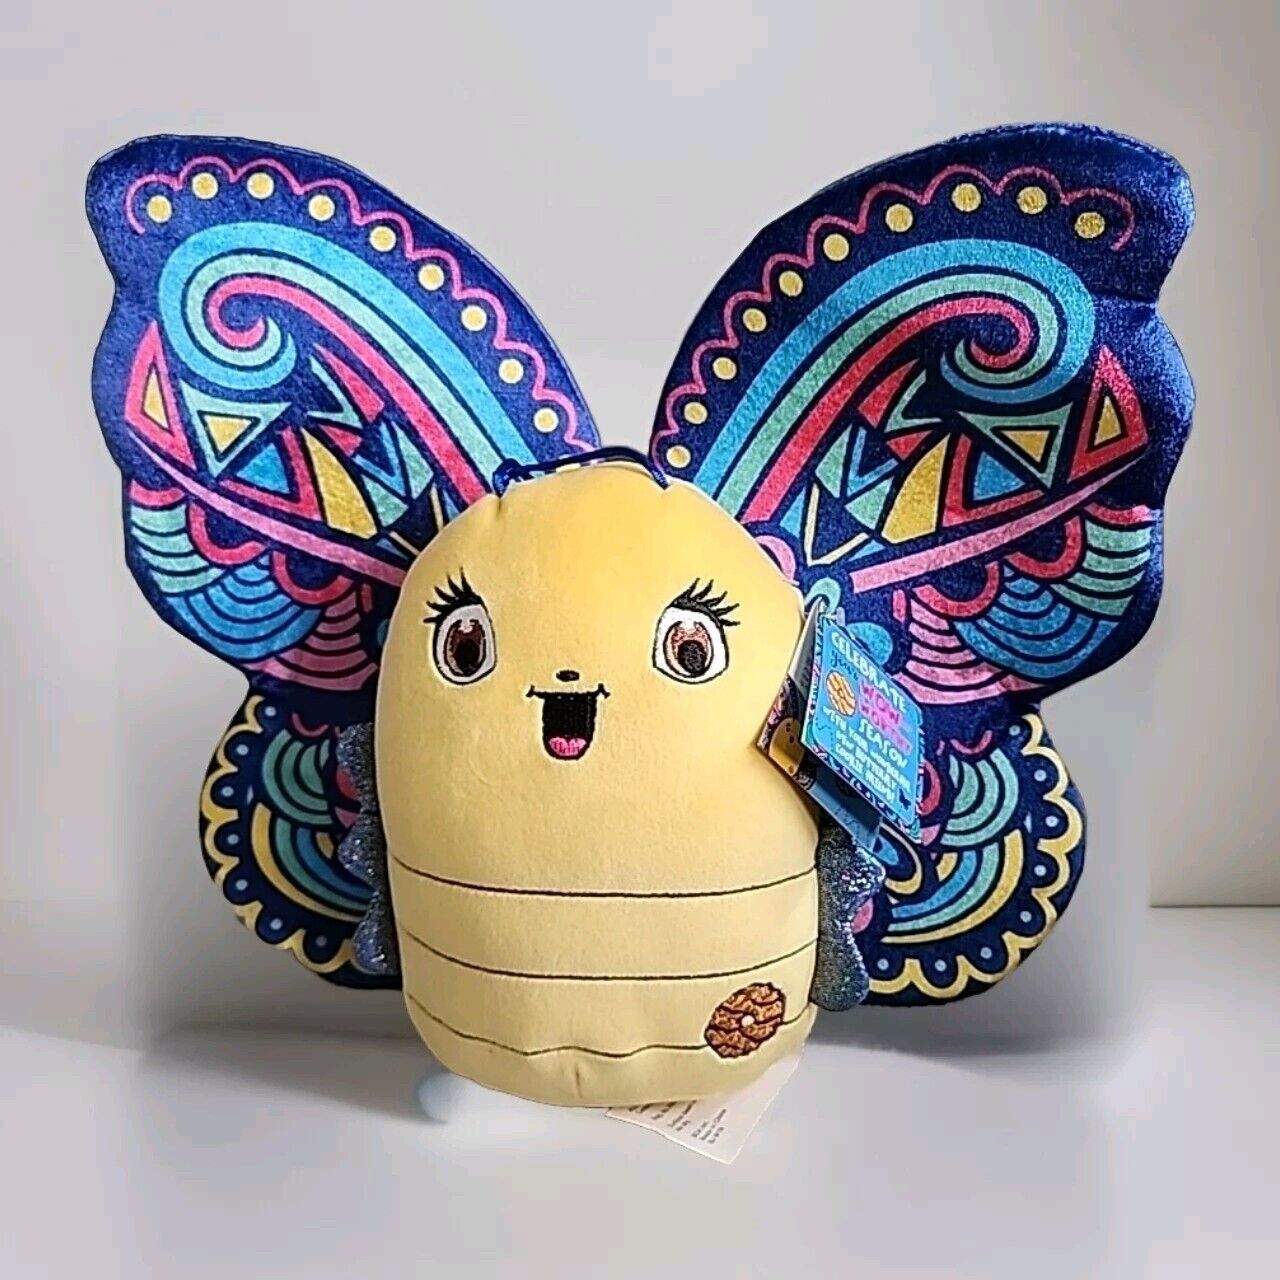 GSA Little Brownie Bakers My Cookie Friend Bella the Butterfly Plush Toy 2019